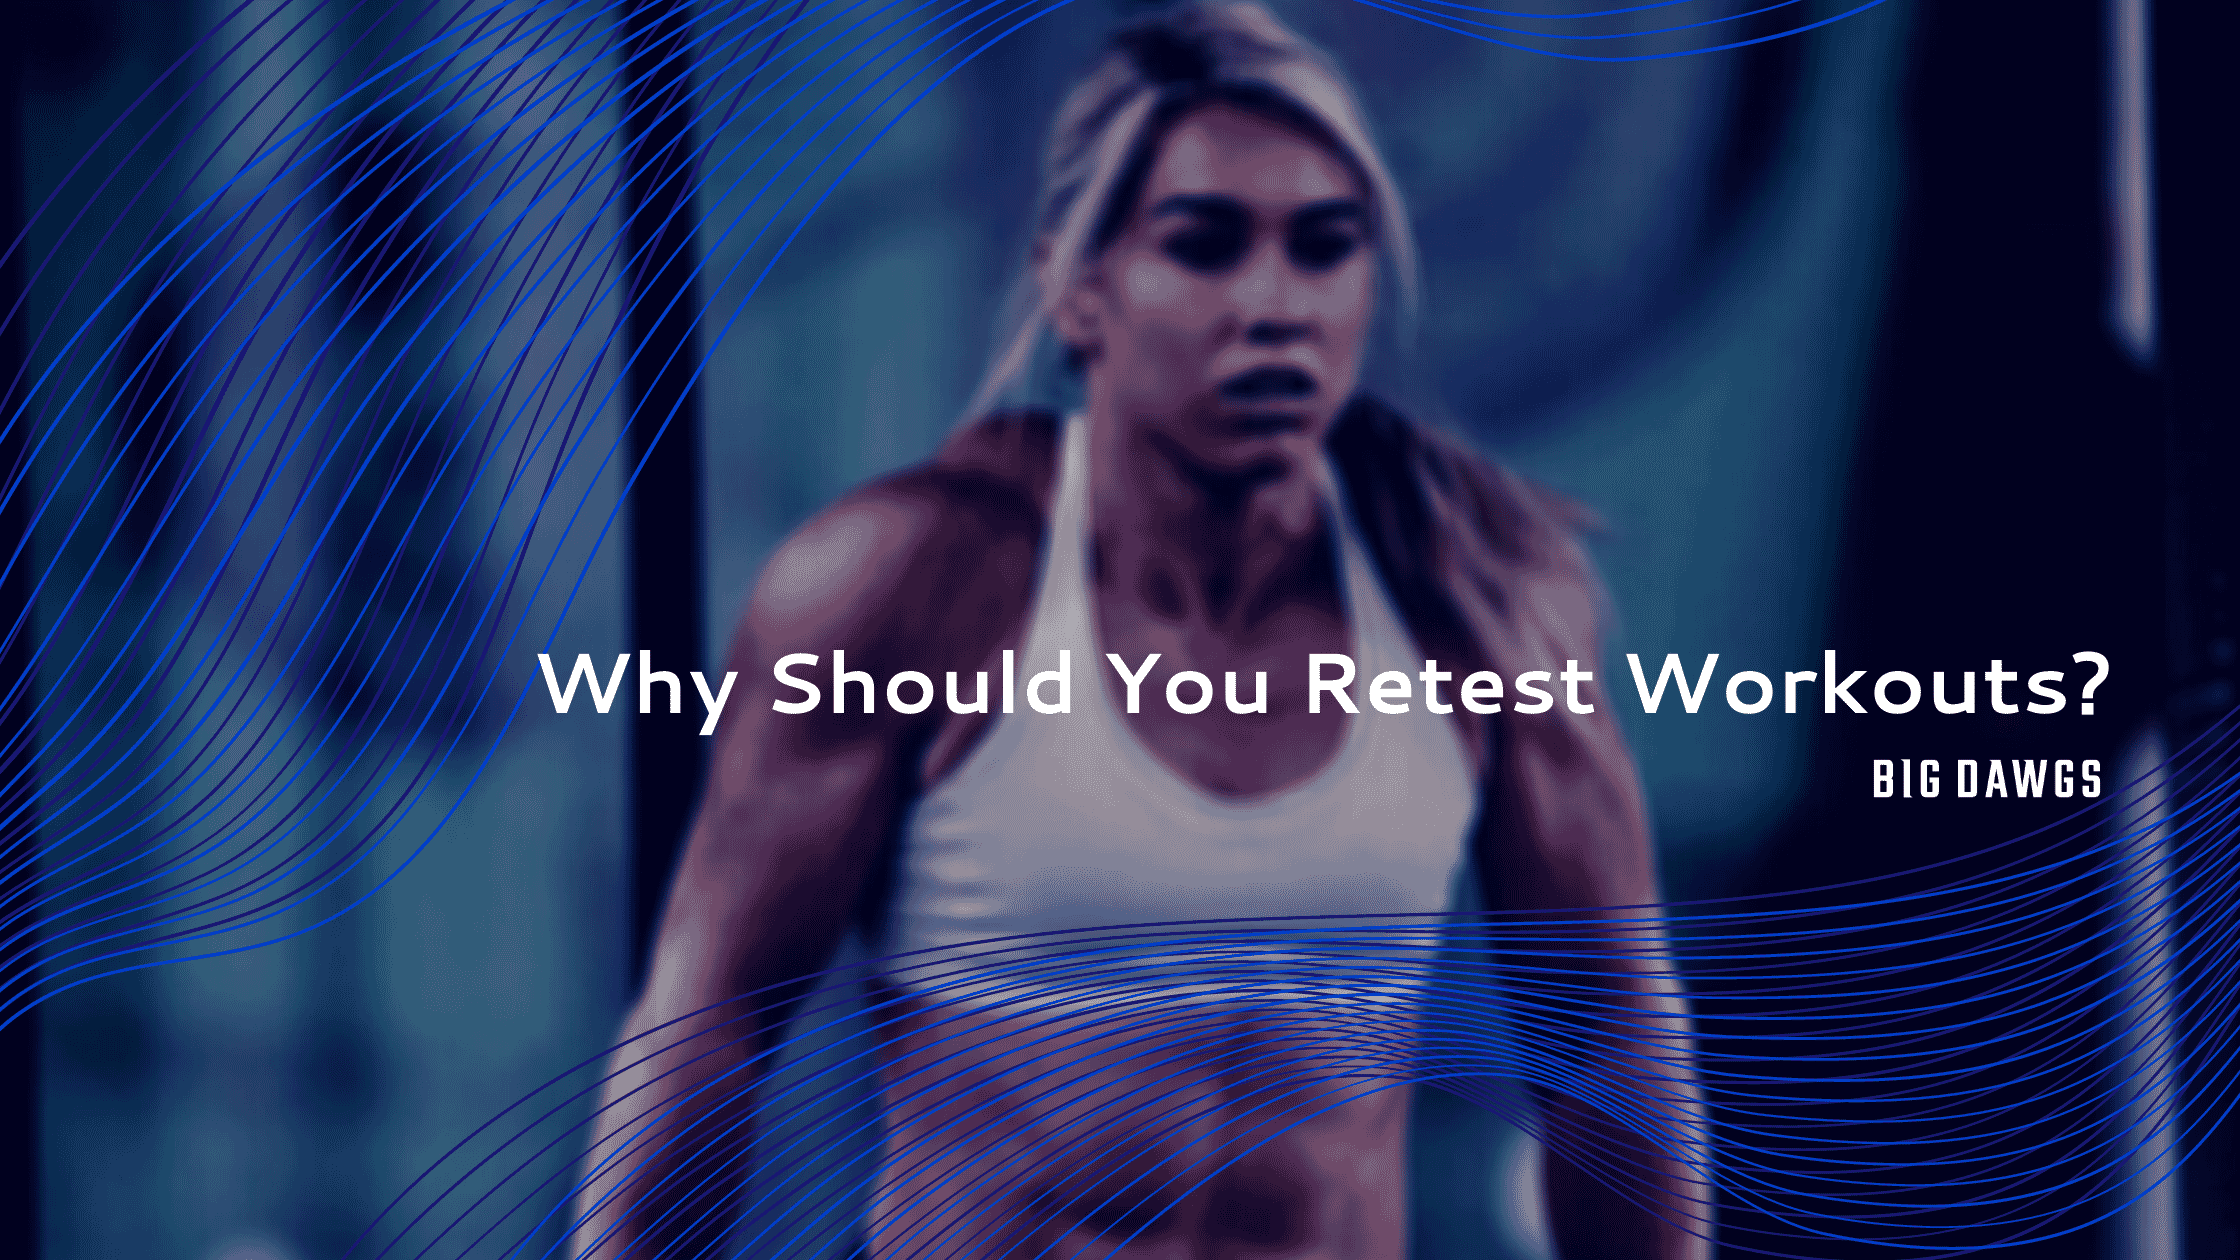 Why should you retest workouts?